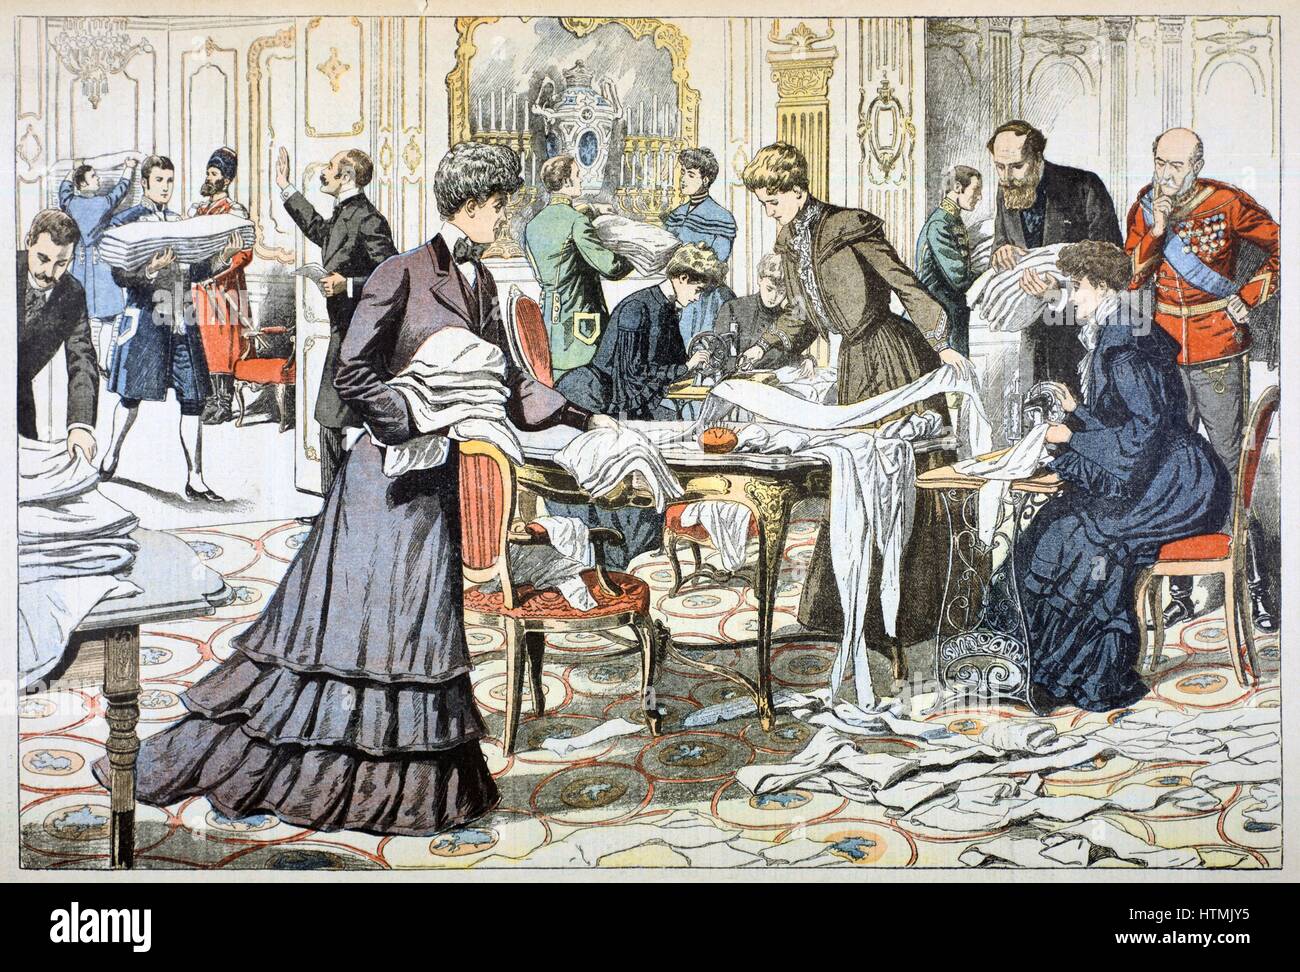 Russo-Japanese War 1904-1905: Workroom in the Winter Palace, St Petersburg, supervised by the Tsarina, producing dressings and gowns for wounded Russians. Note sewing machines. From 'Le Petit Journal', Paris, 28 February 1904. Stock Photo